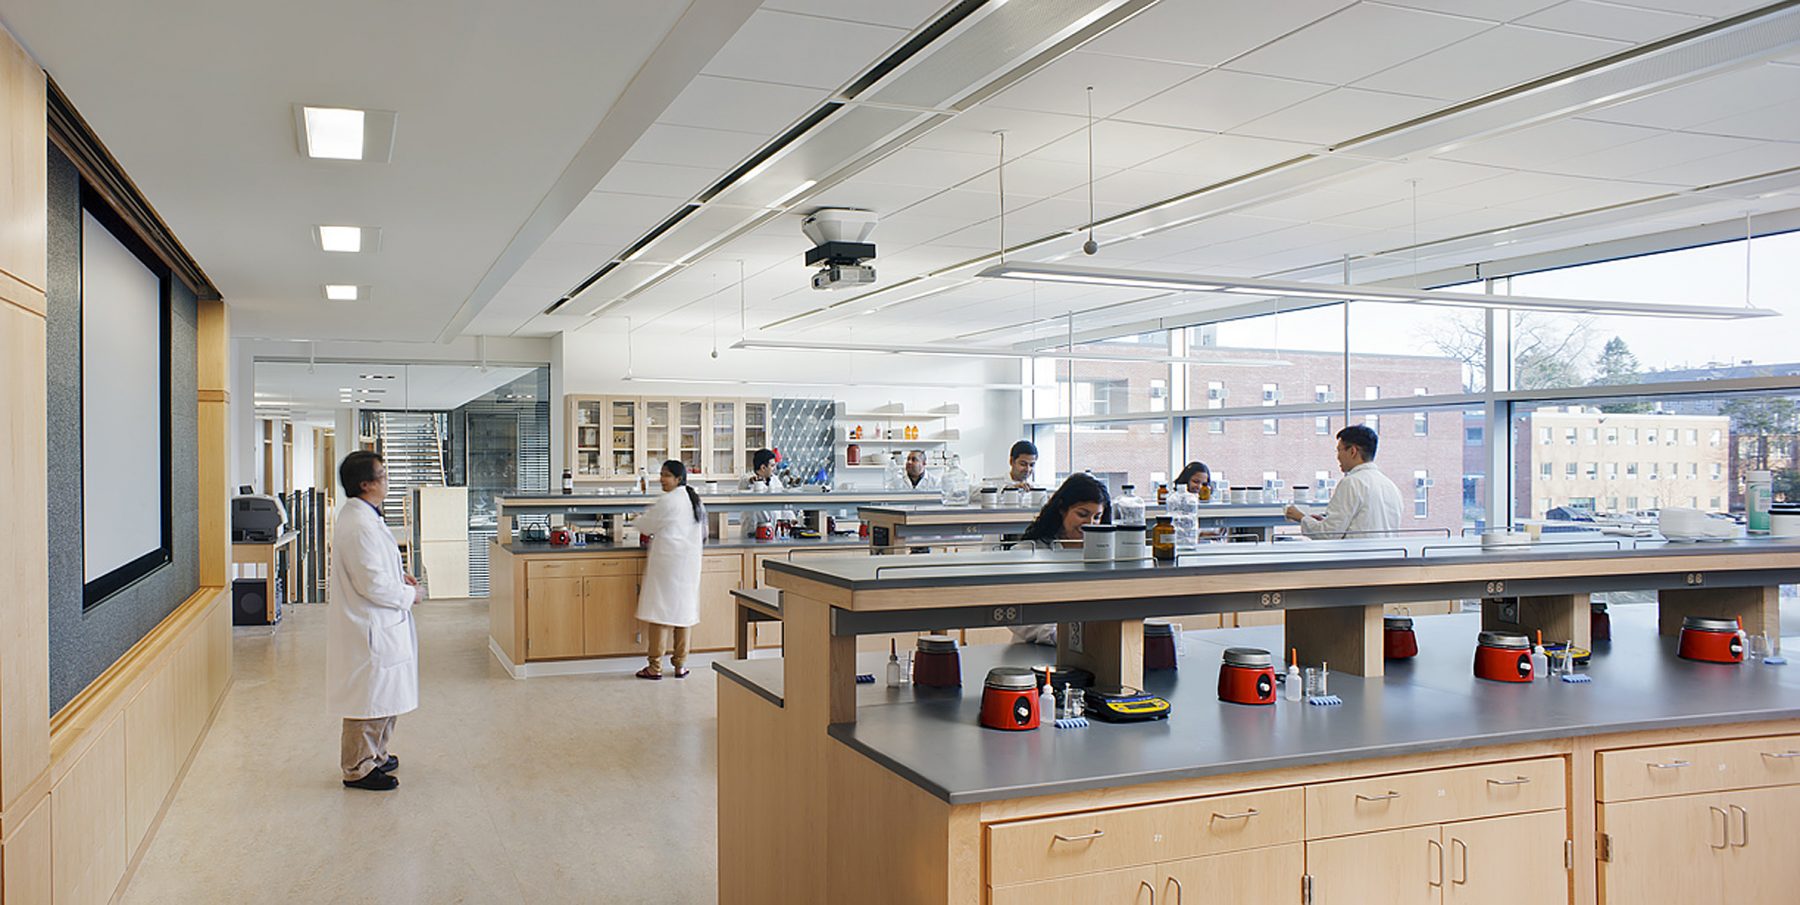 Uri College Of Pharmacy Lab with 8 students in lab coats